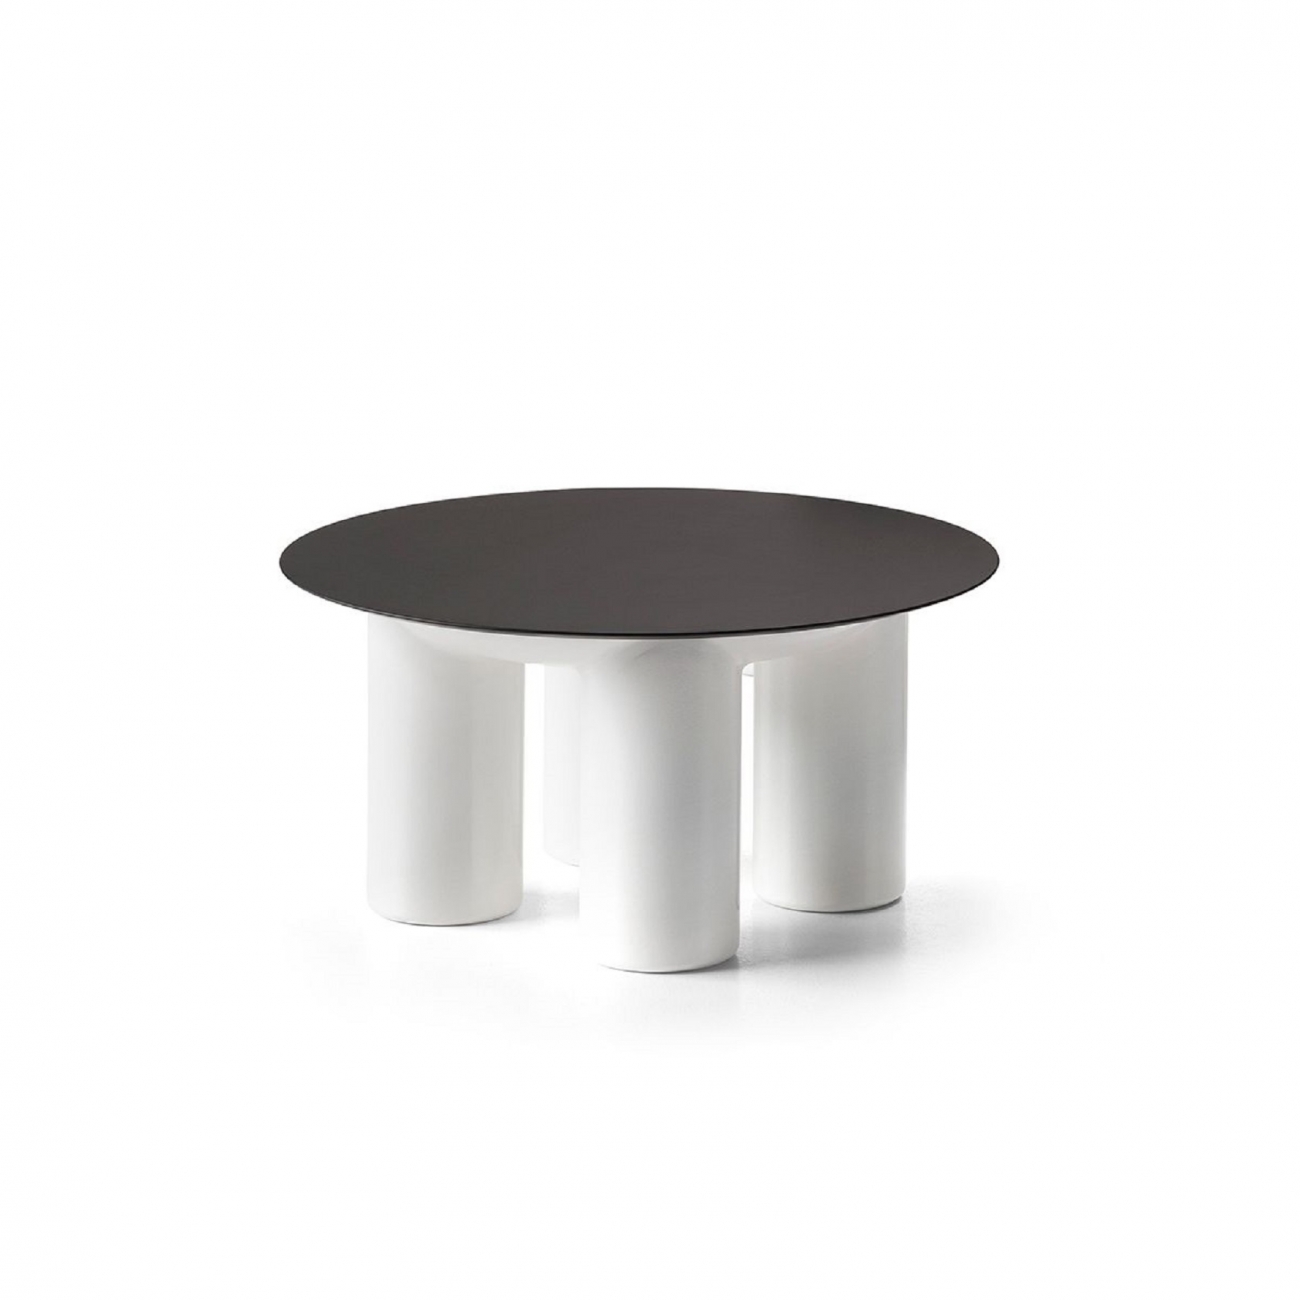 PLUST COLLECTION ATENE COFFEE TABLE